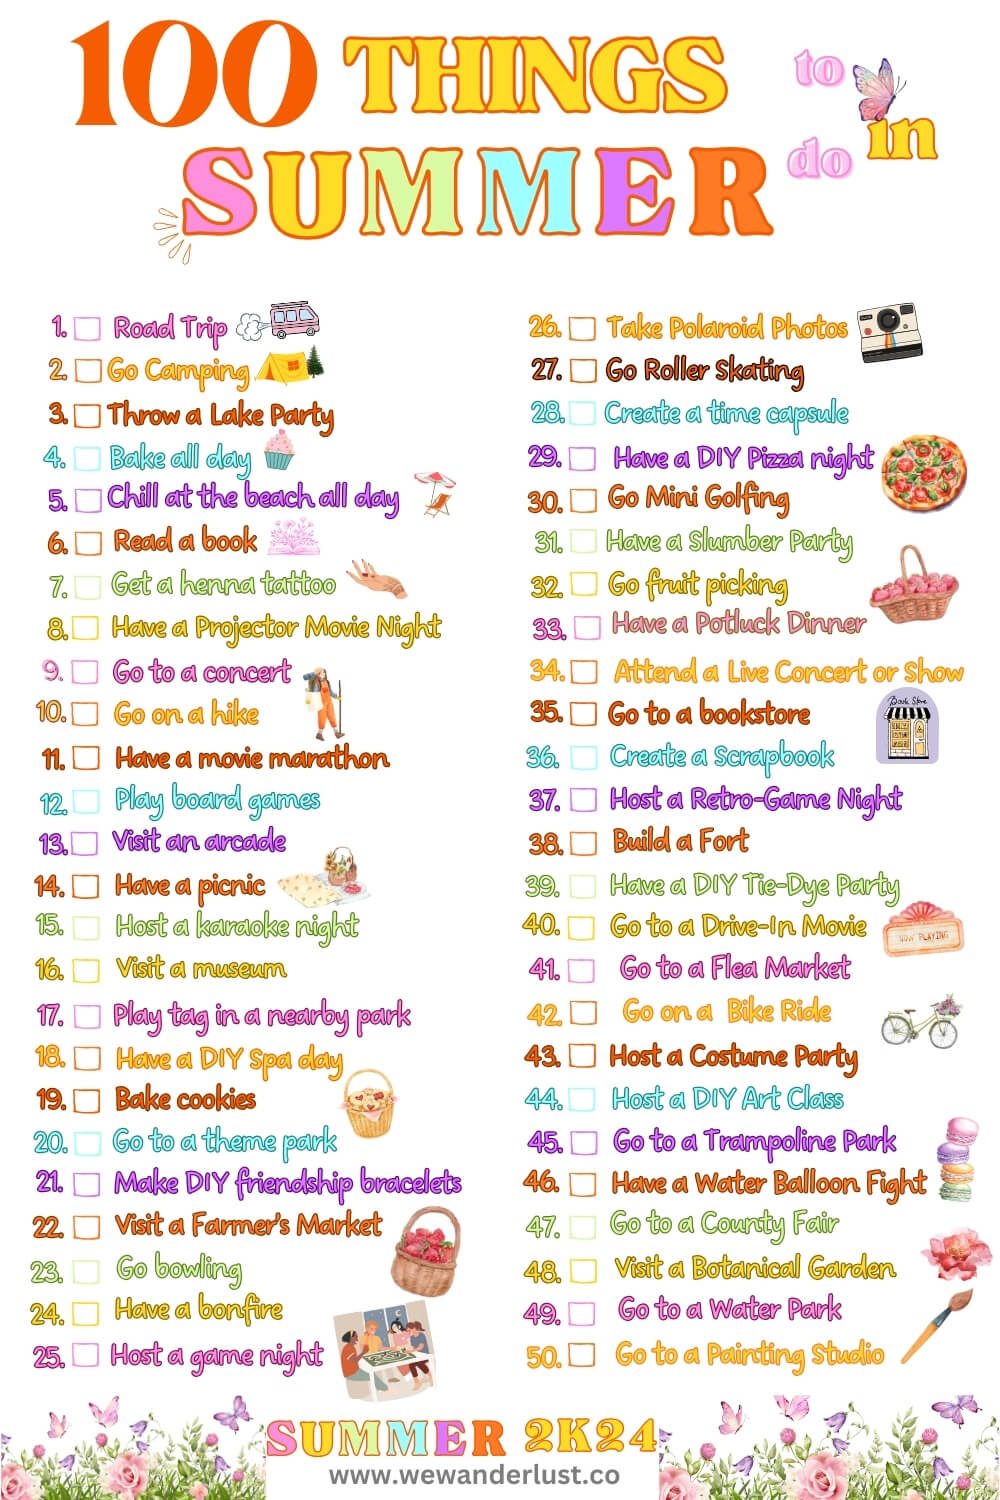 100 things to do in summer list